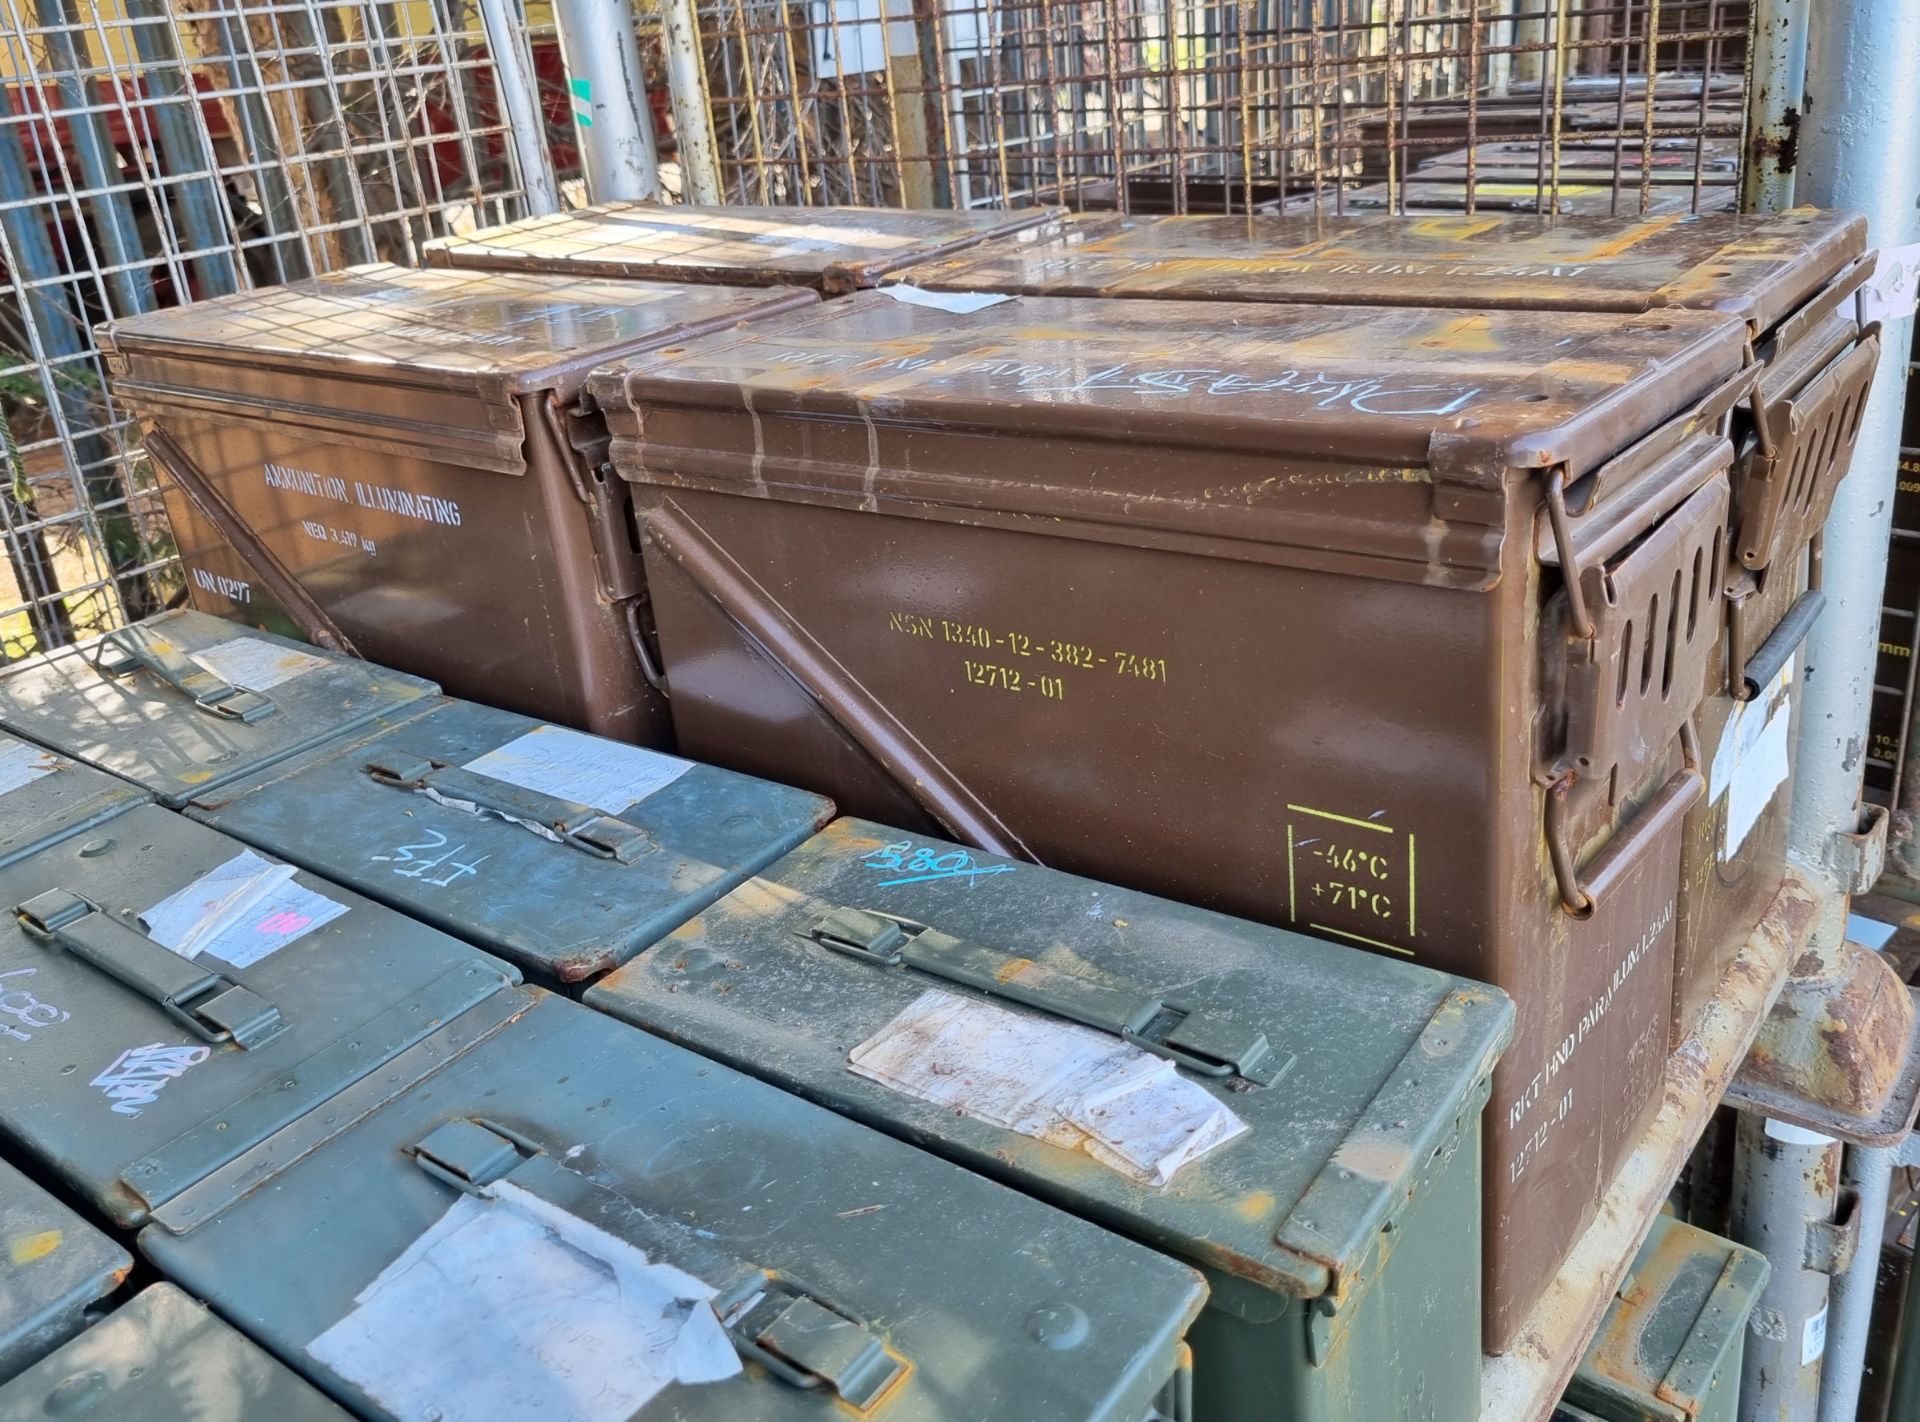 14x M2A1 ammo boxes, 4x M548 ammo boxes - Image 3 of 5